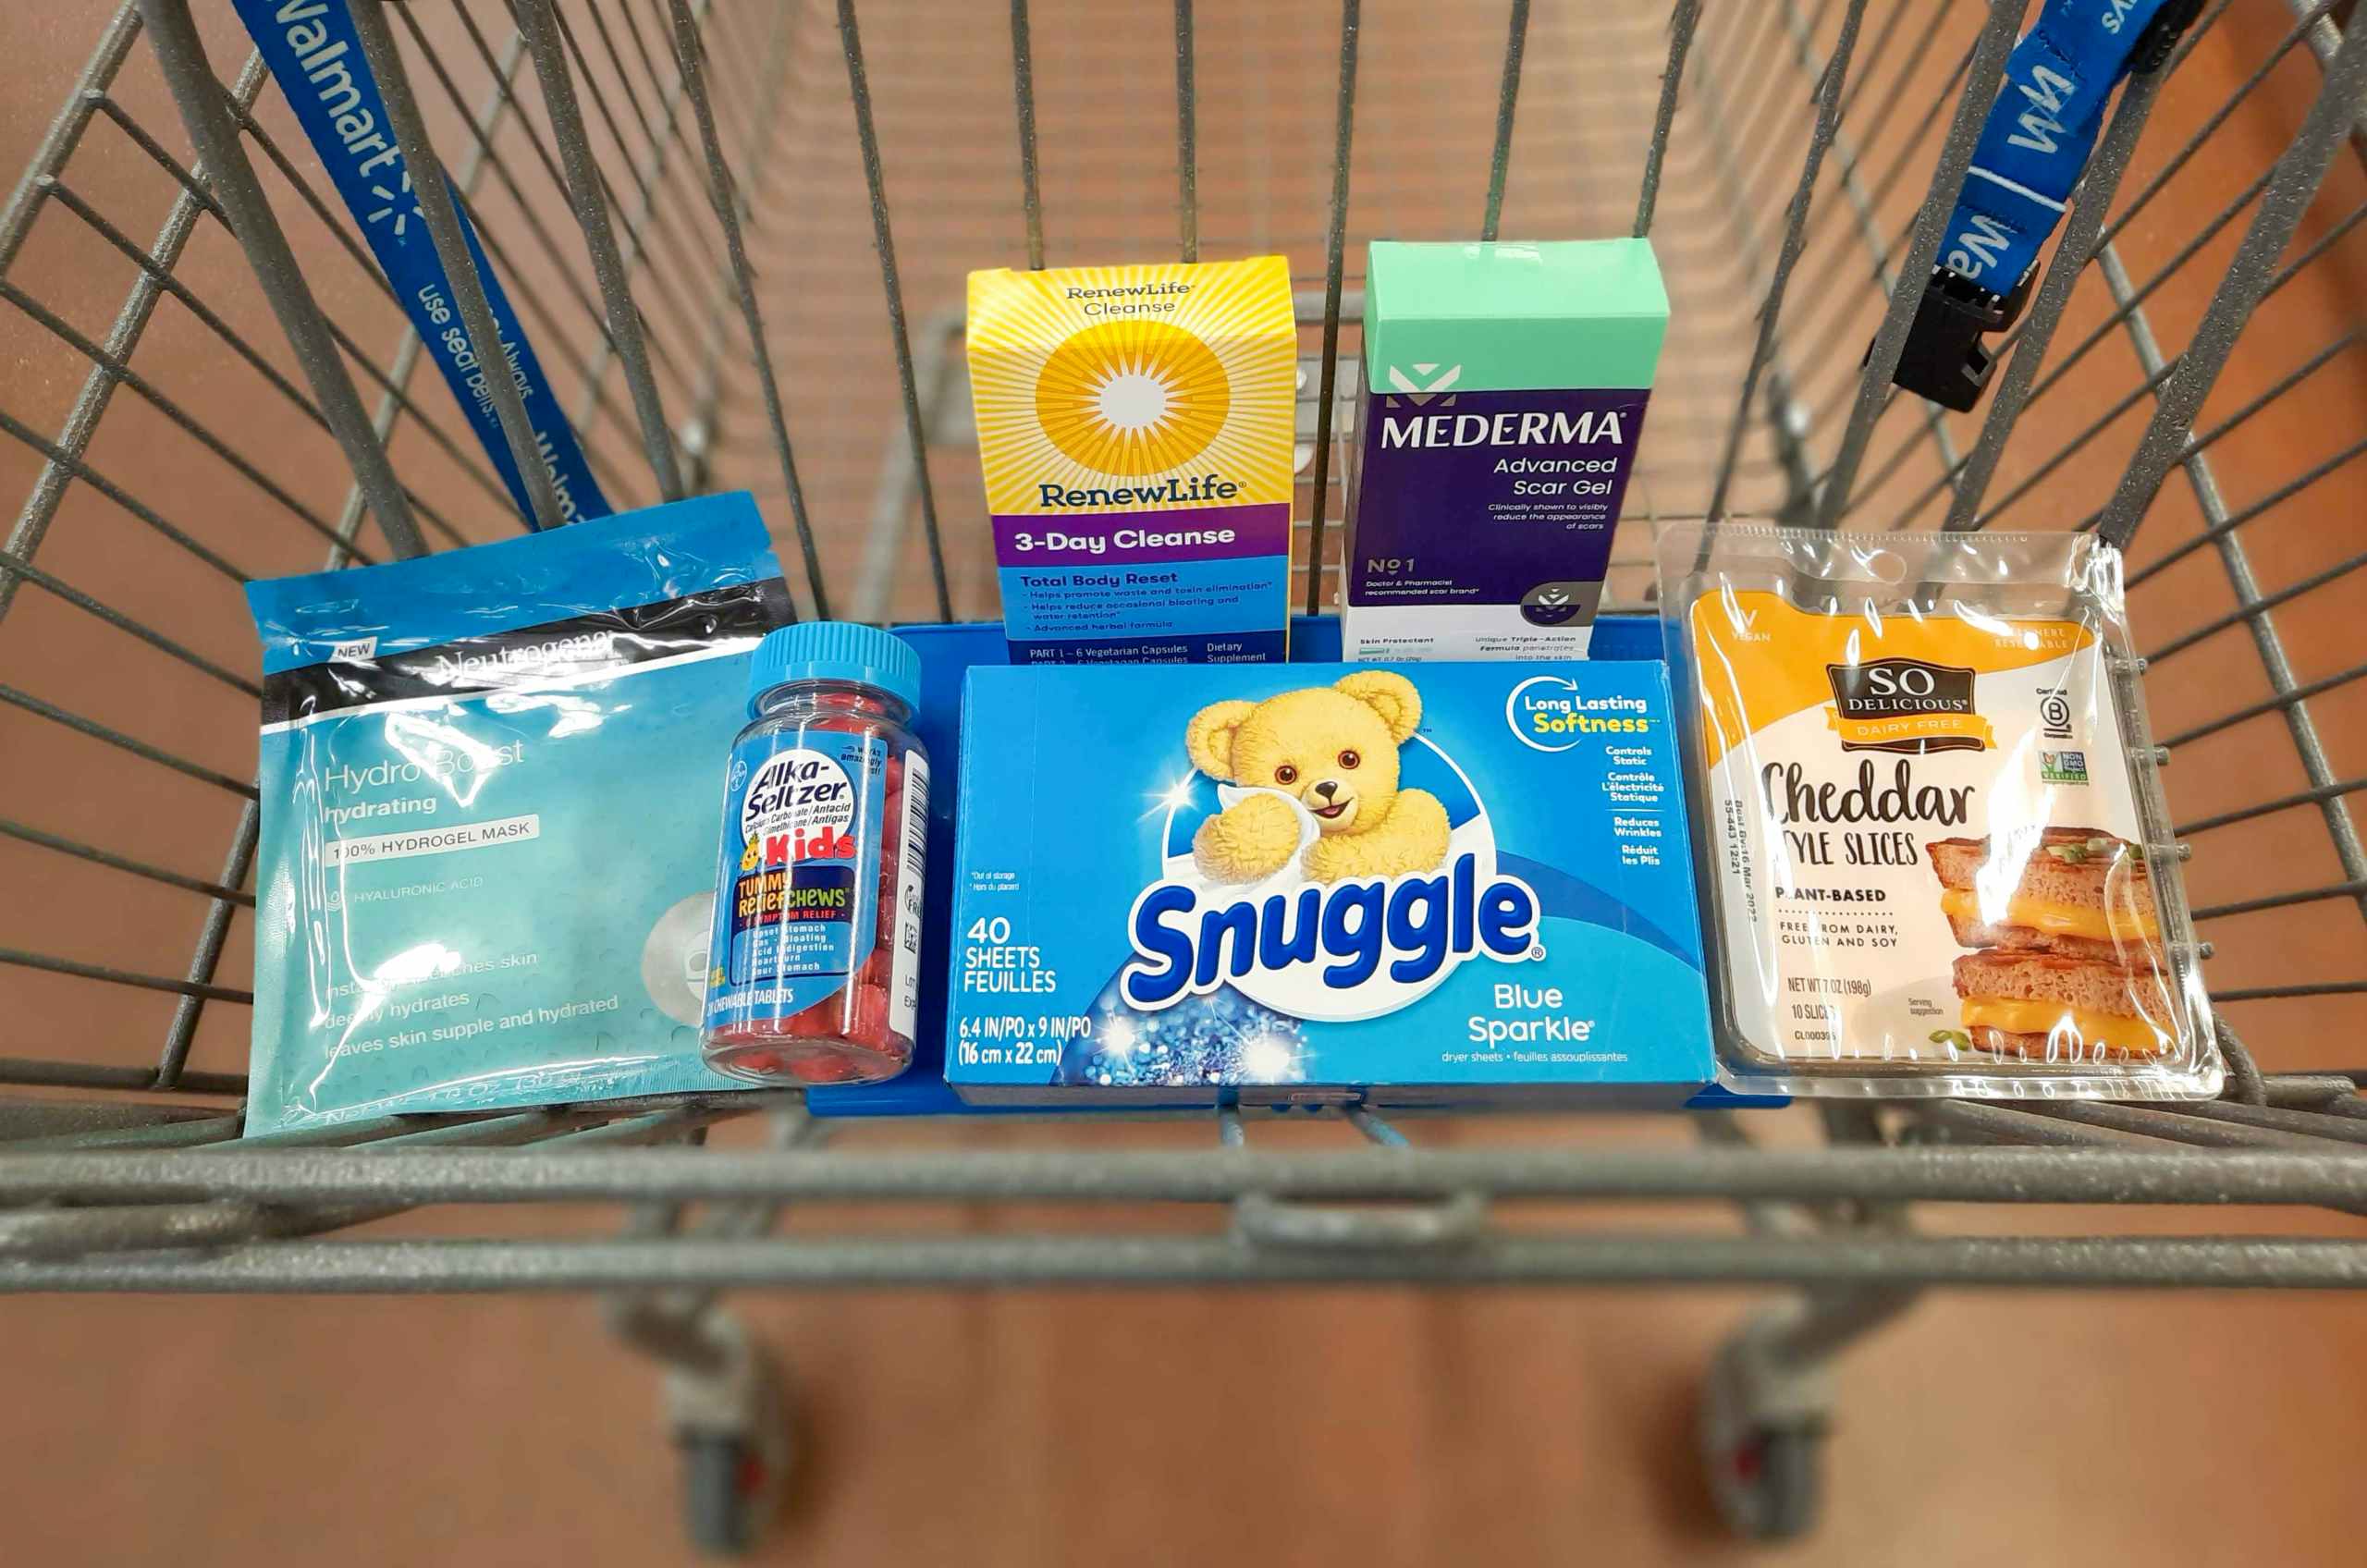 Snuggle, Neutrogena, Alka-Seltzer, Renew Life, Mederma, and So Delicious products in Walmart shopping cart